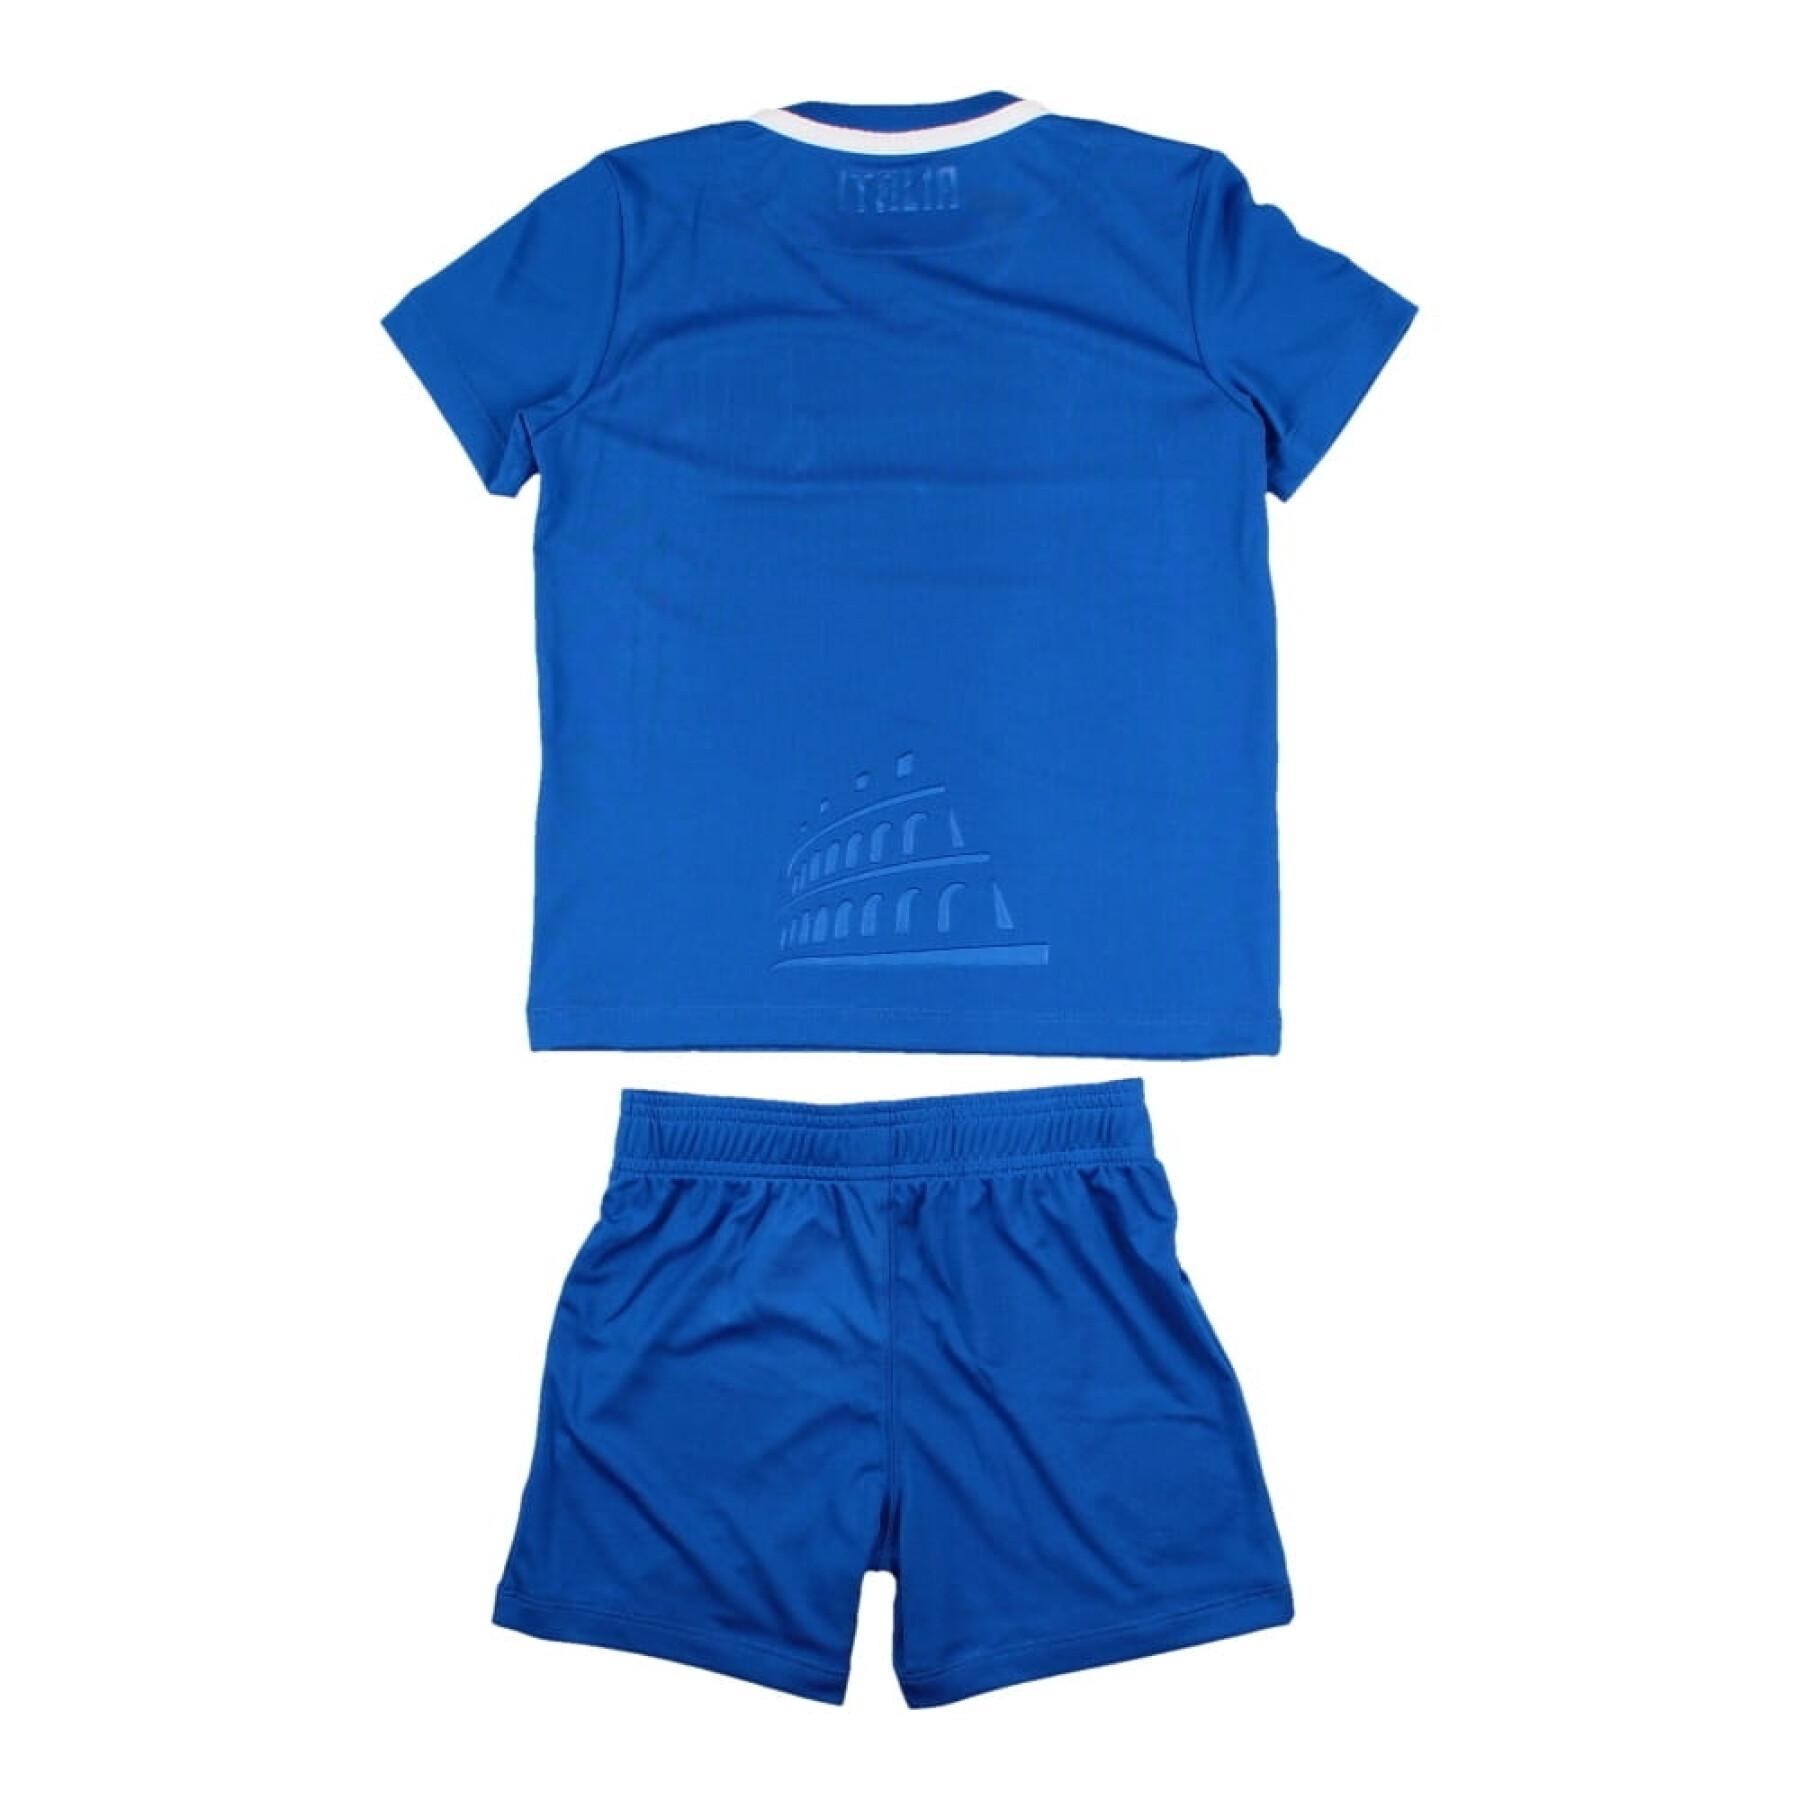 Baby home kit Italy Rugby 2022/23